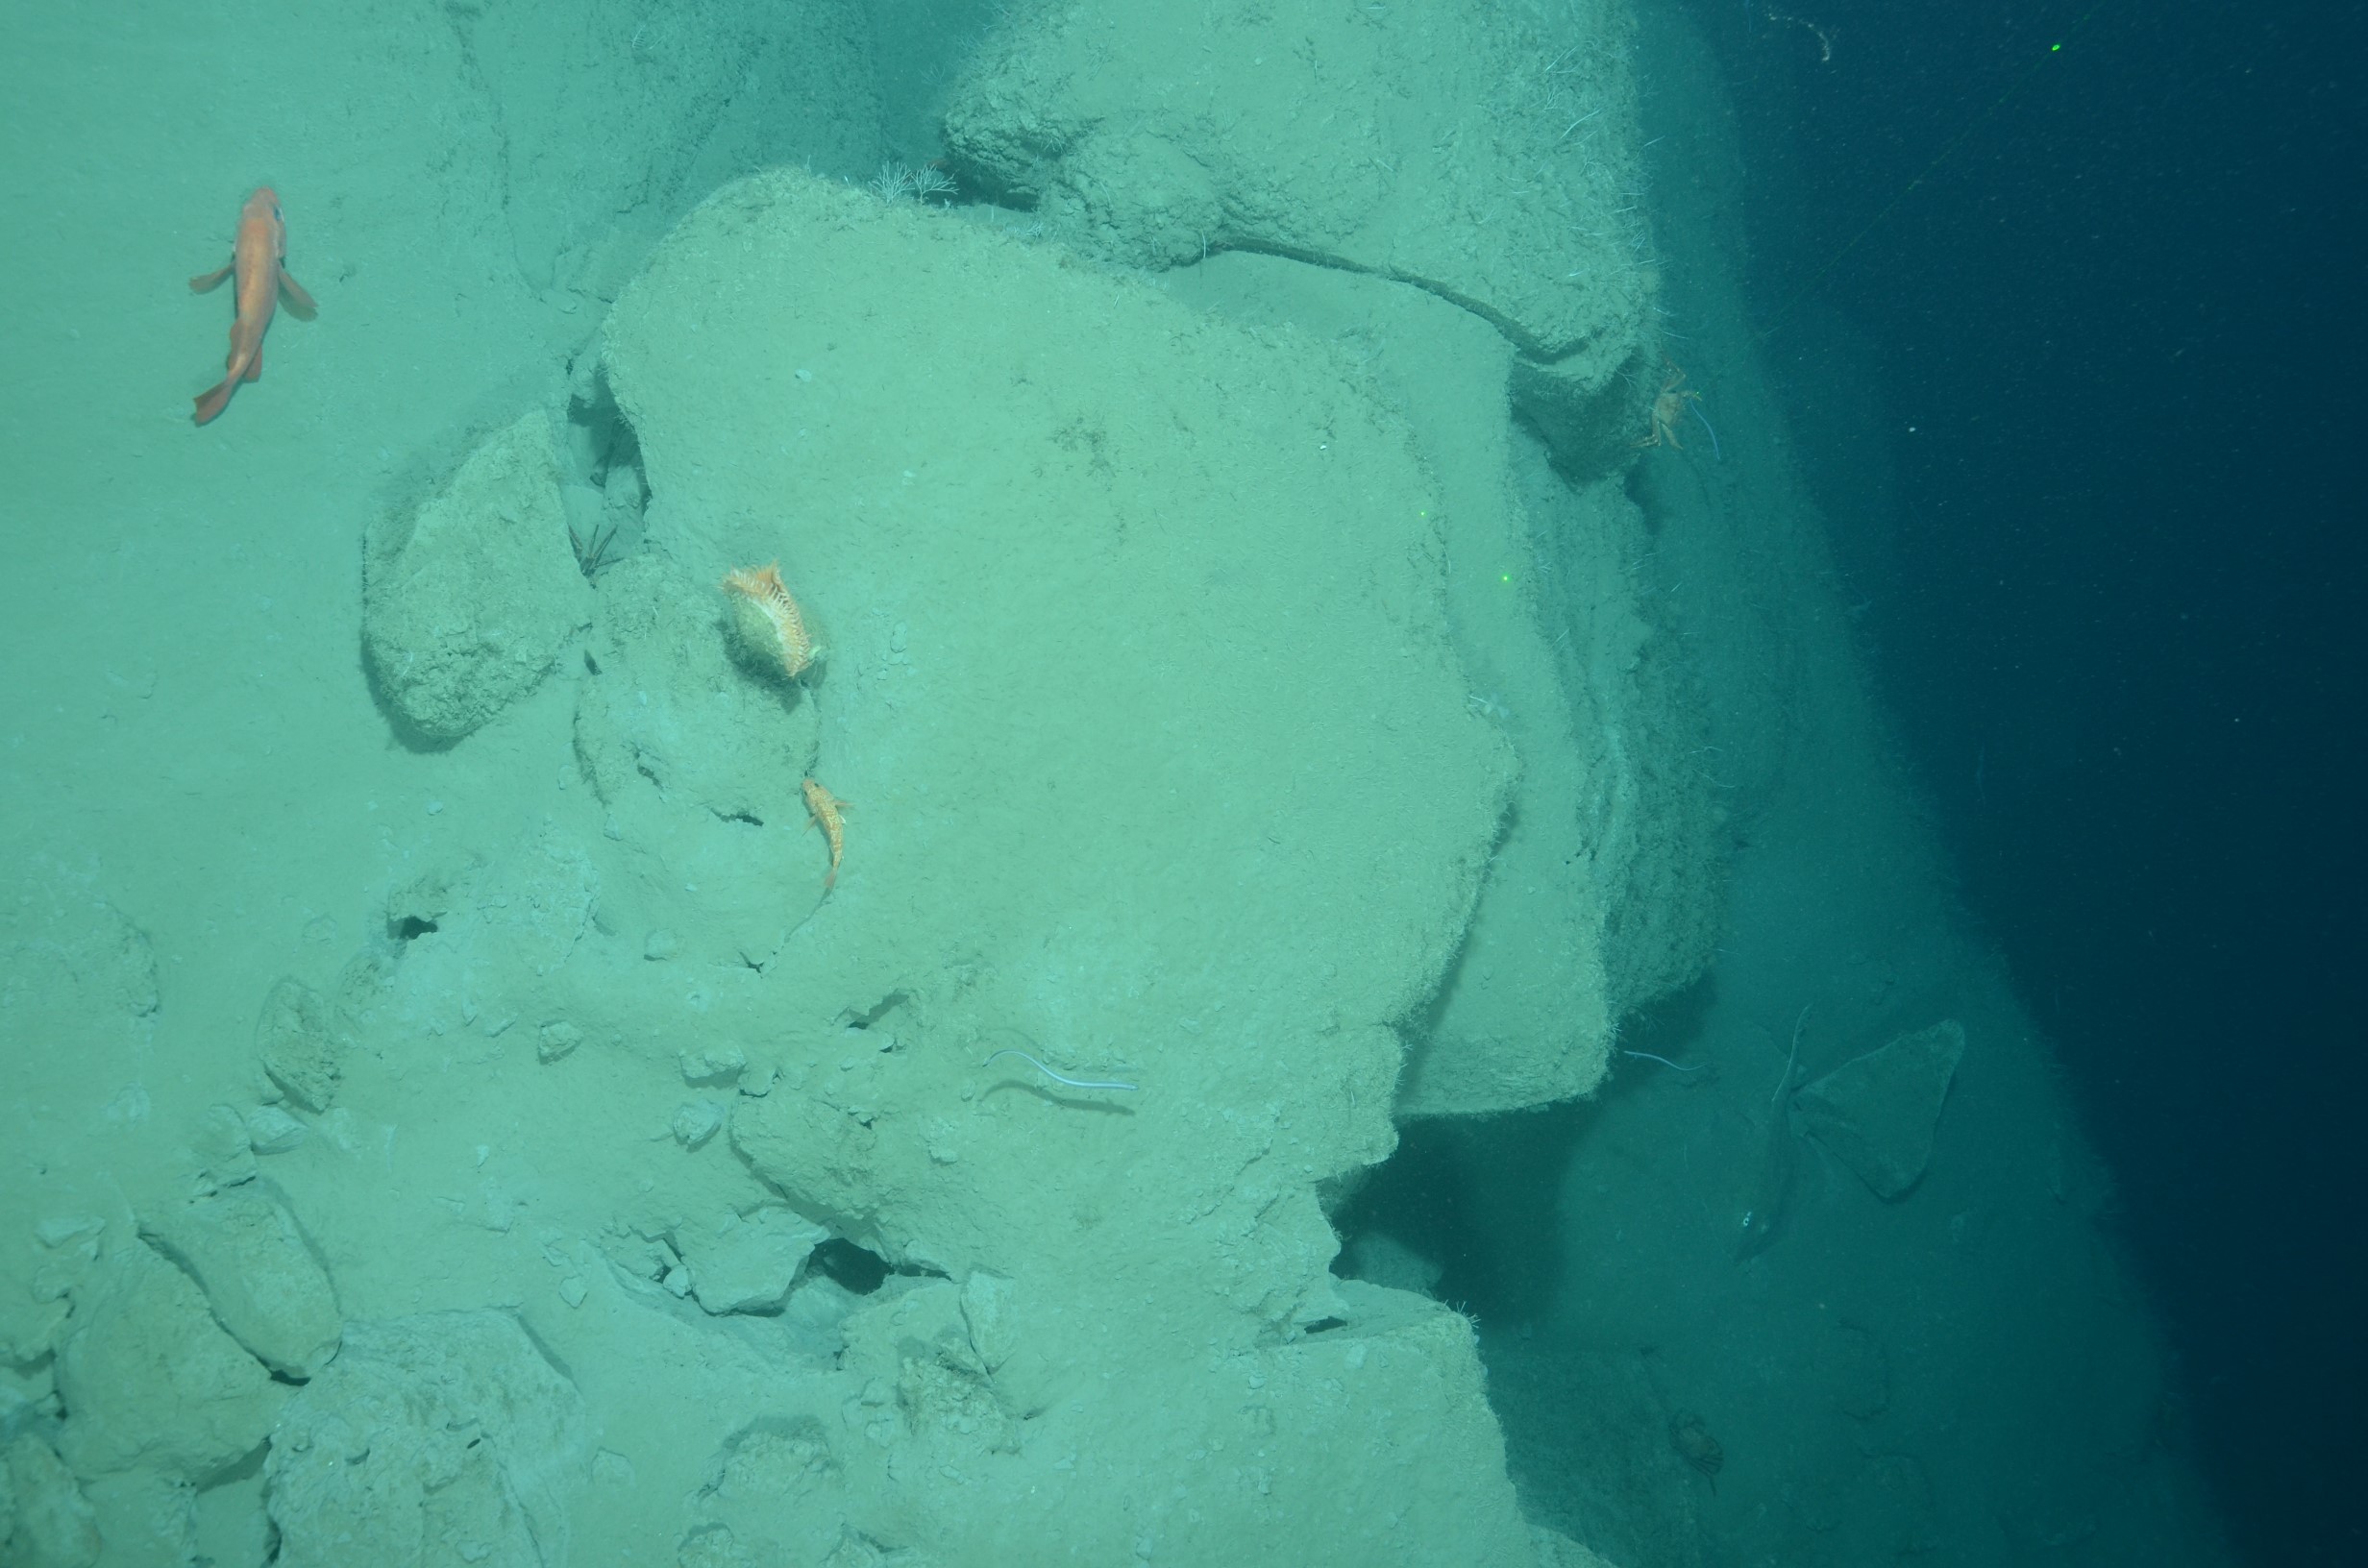 A vertical margin near 840 meters with several species of fish, crabs and sponges in Wilmington Canyon